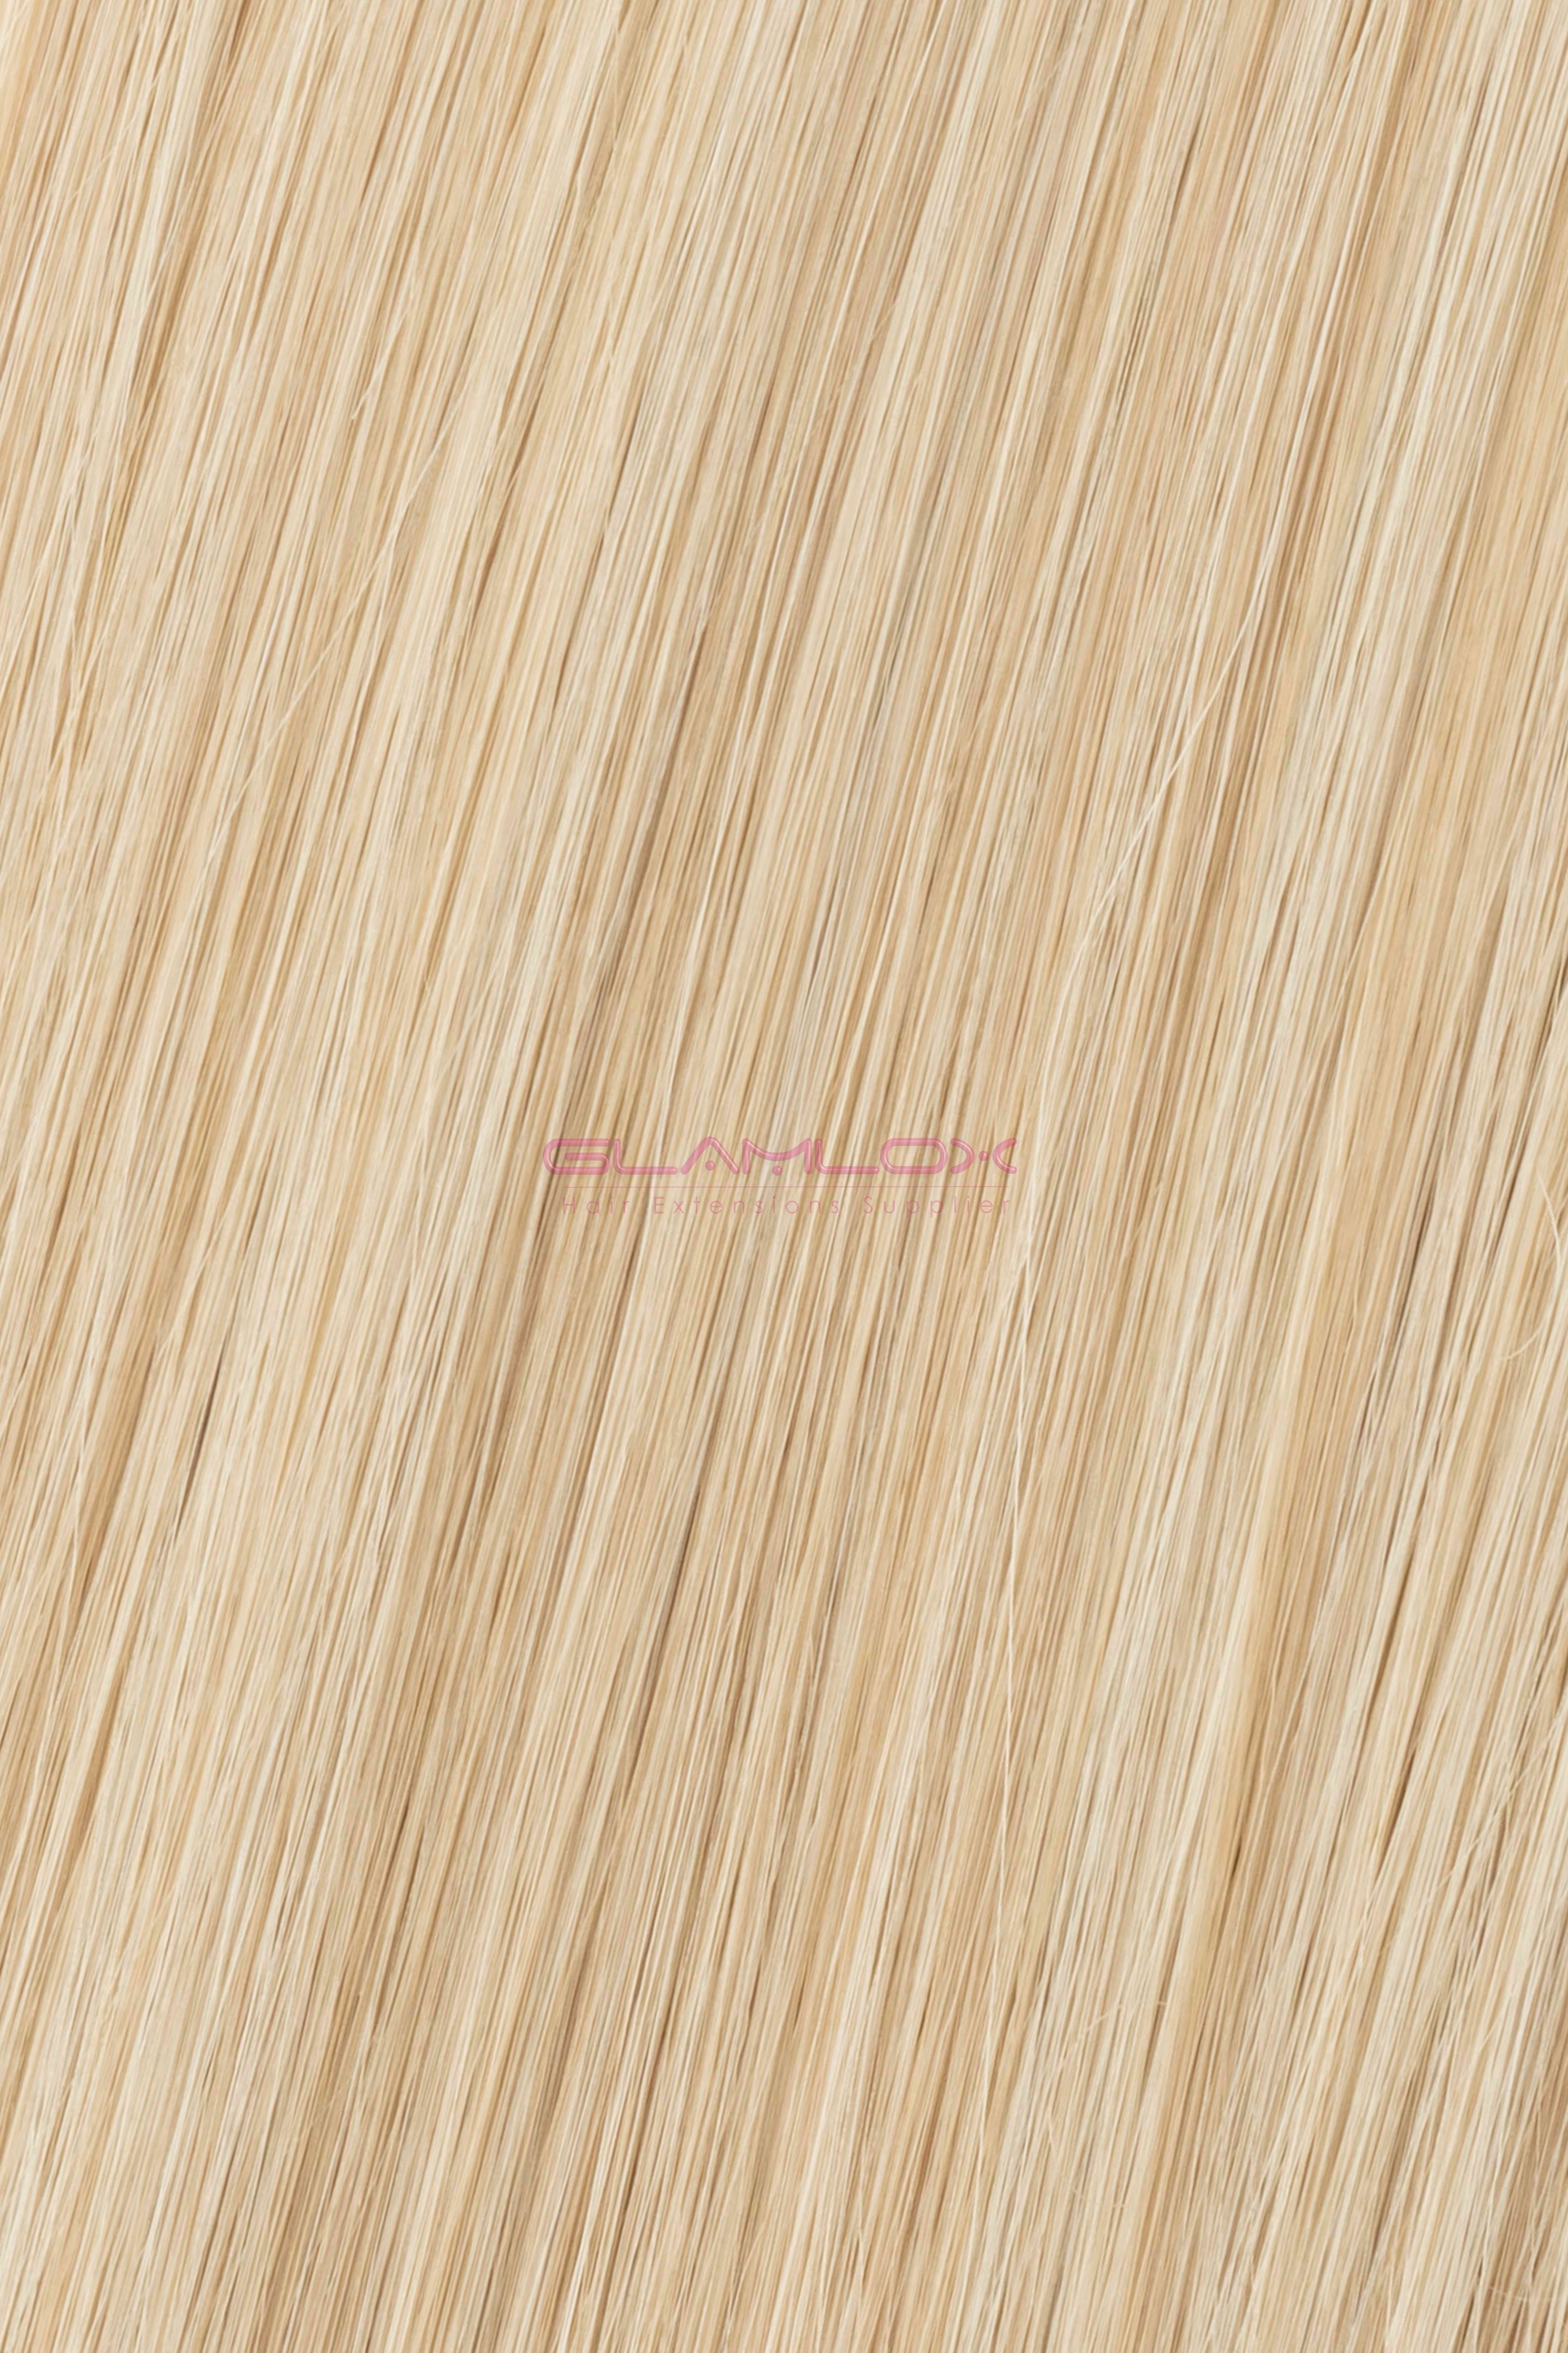 20" Pre-Bonded - Russian Mongolian Double Drawn Remy Human Hair - 20 Strands